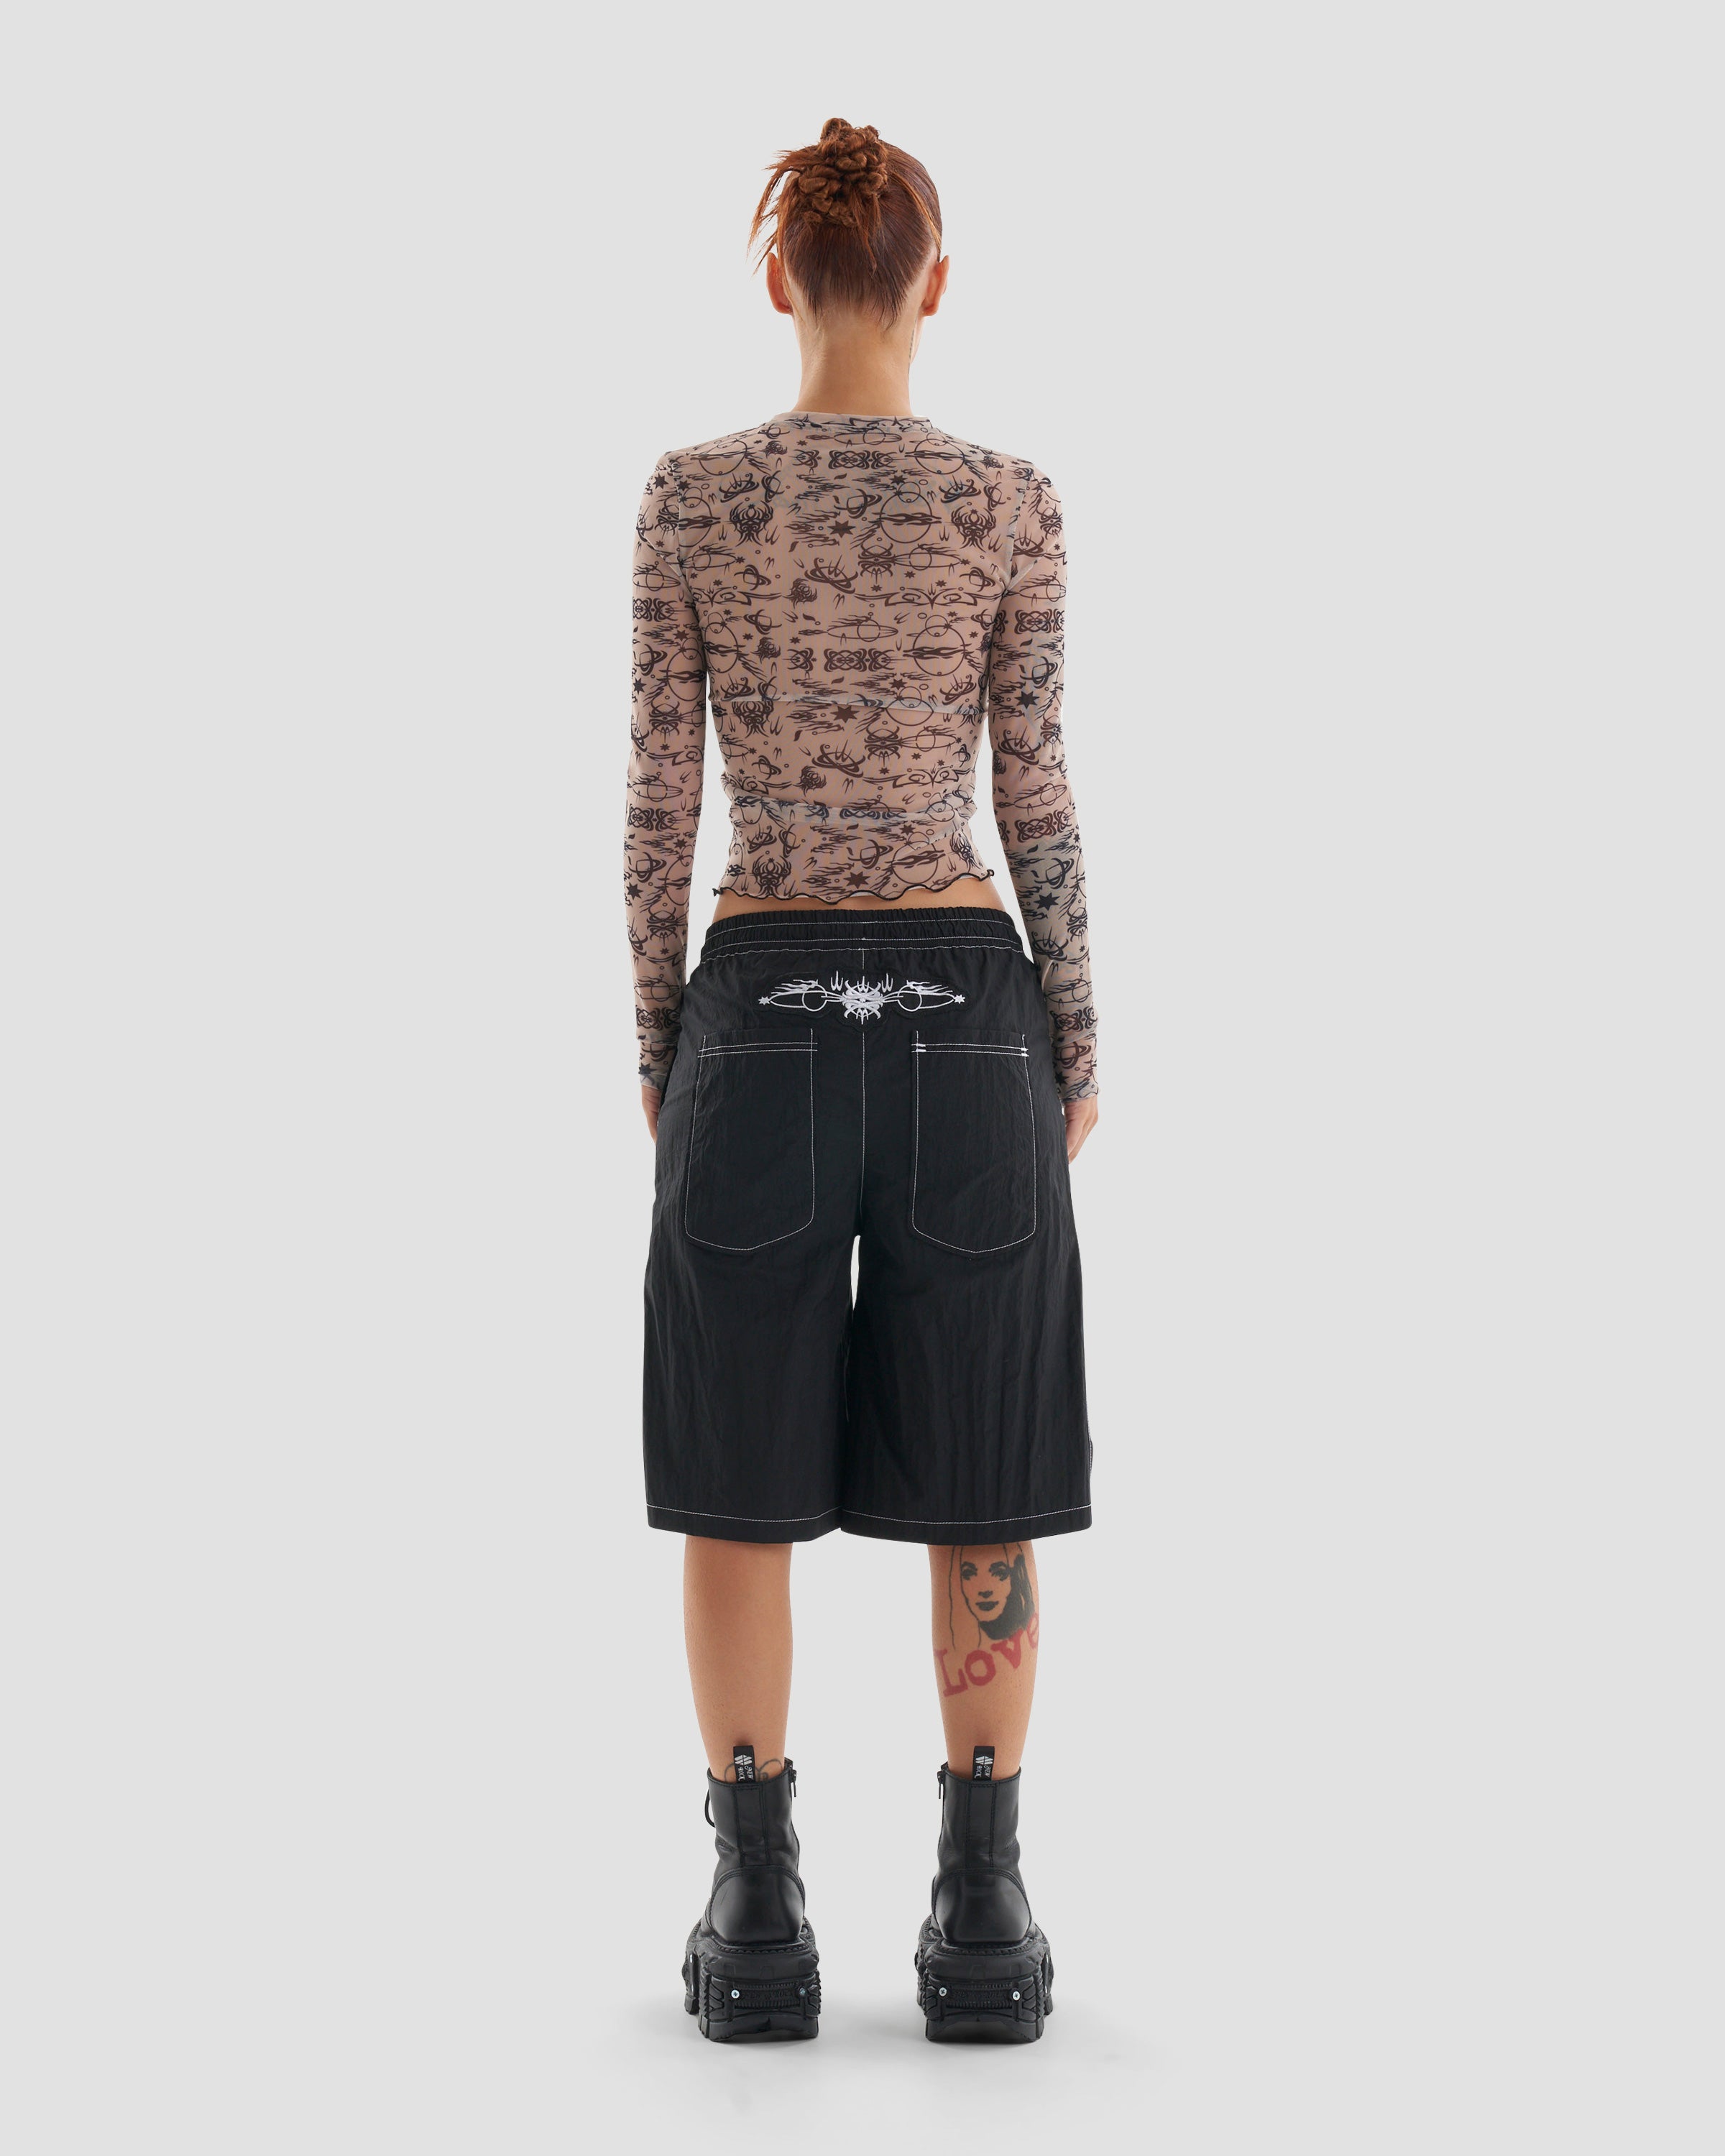 Image of Play Harder Oversized Parachute Basketball Shorts with Tattoo Print in Black